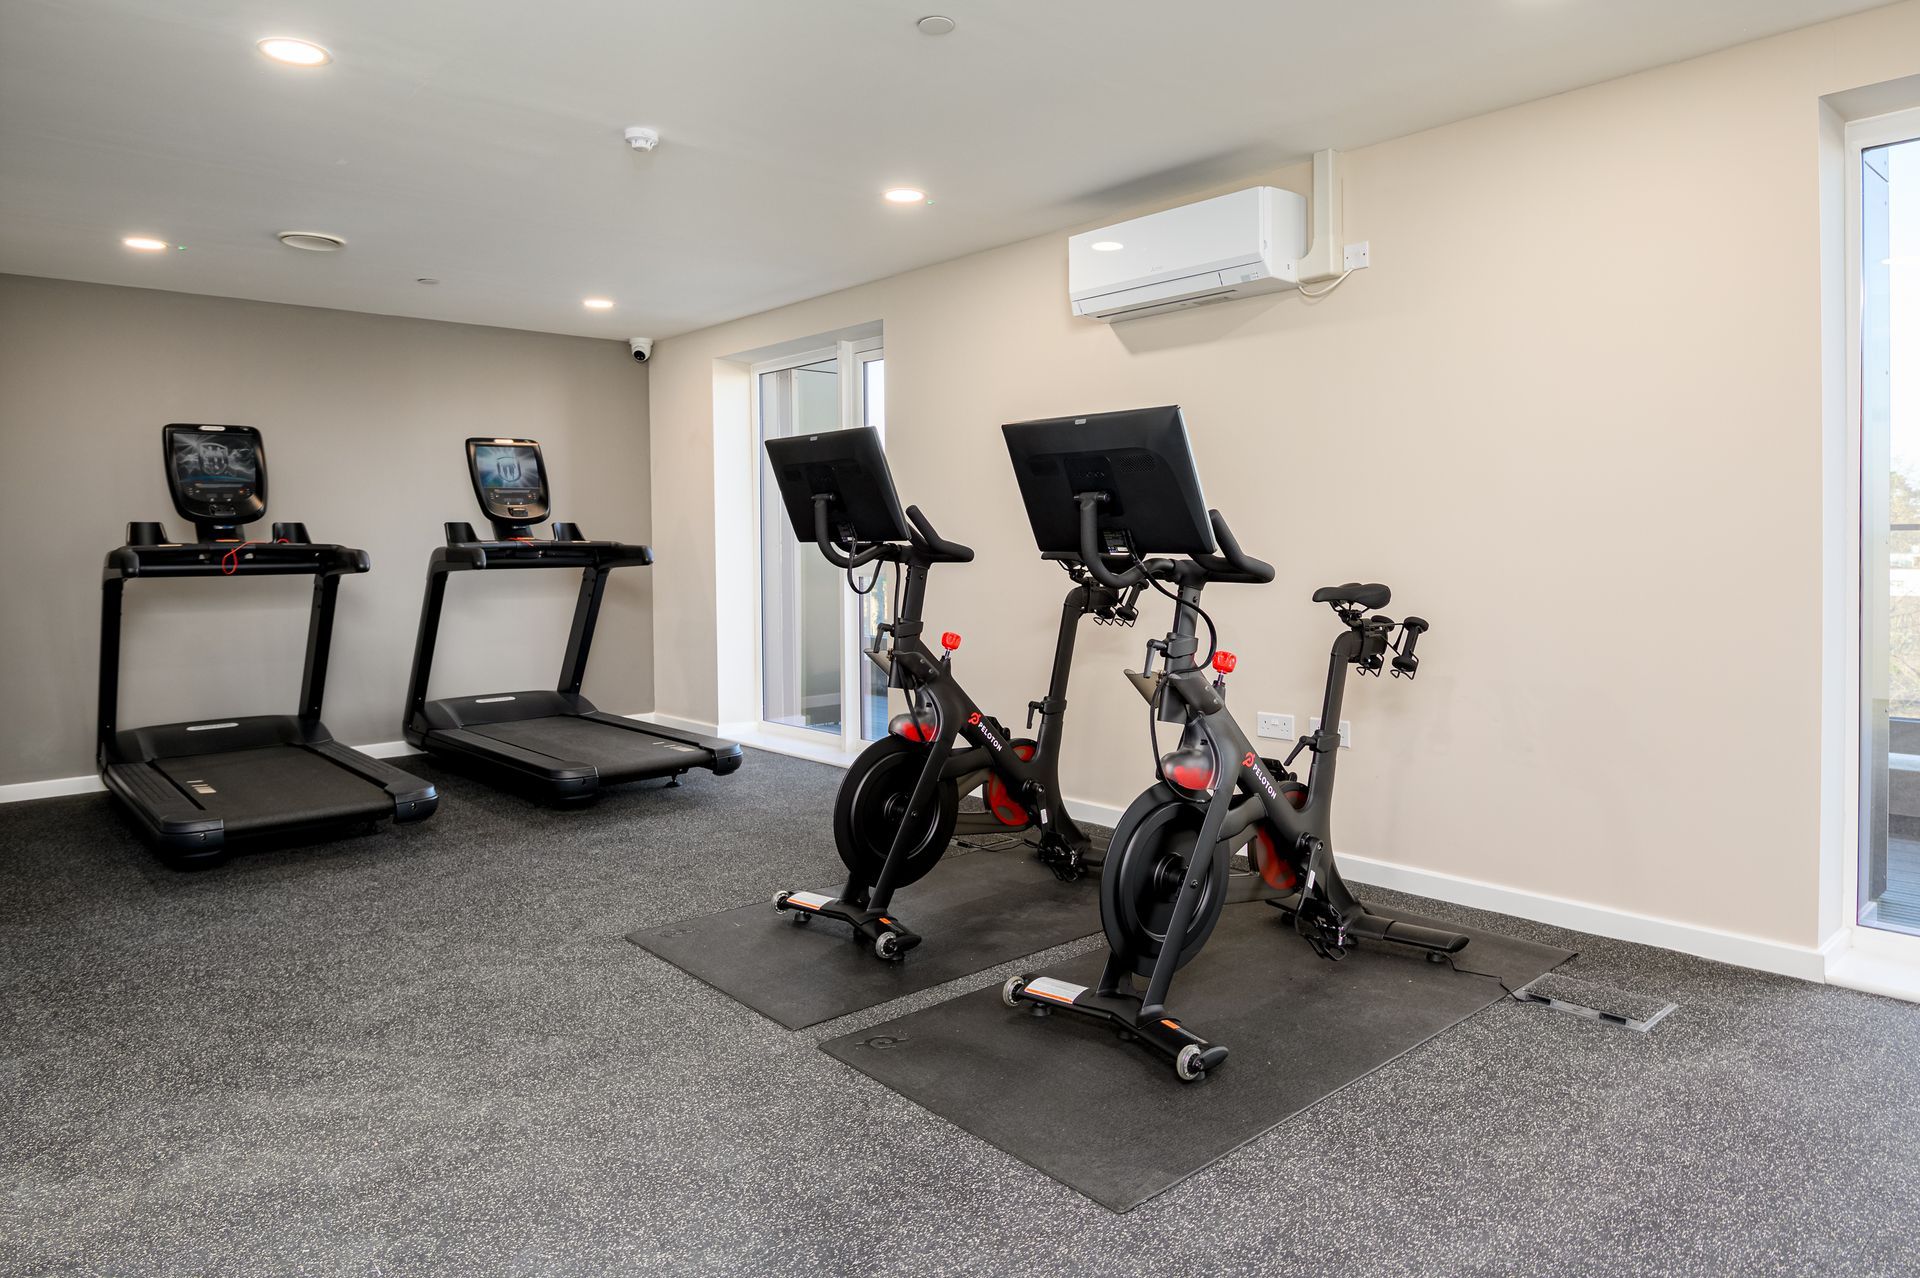 A gym with treadmills and exercise bikes at Walton Court.